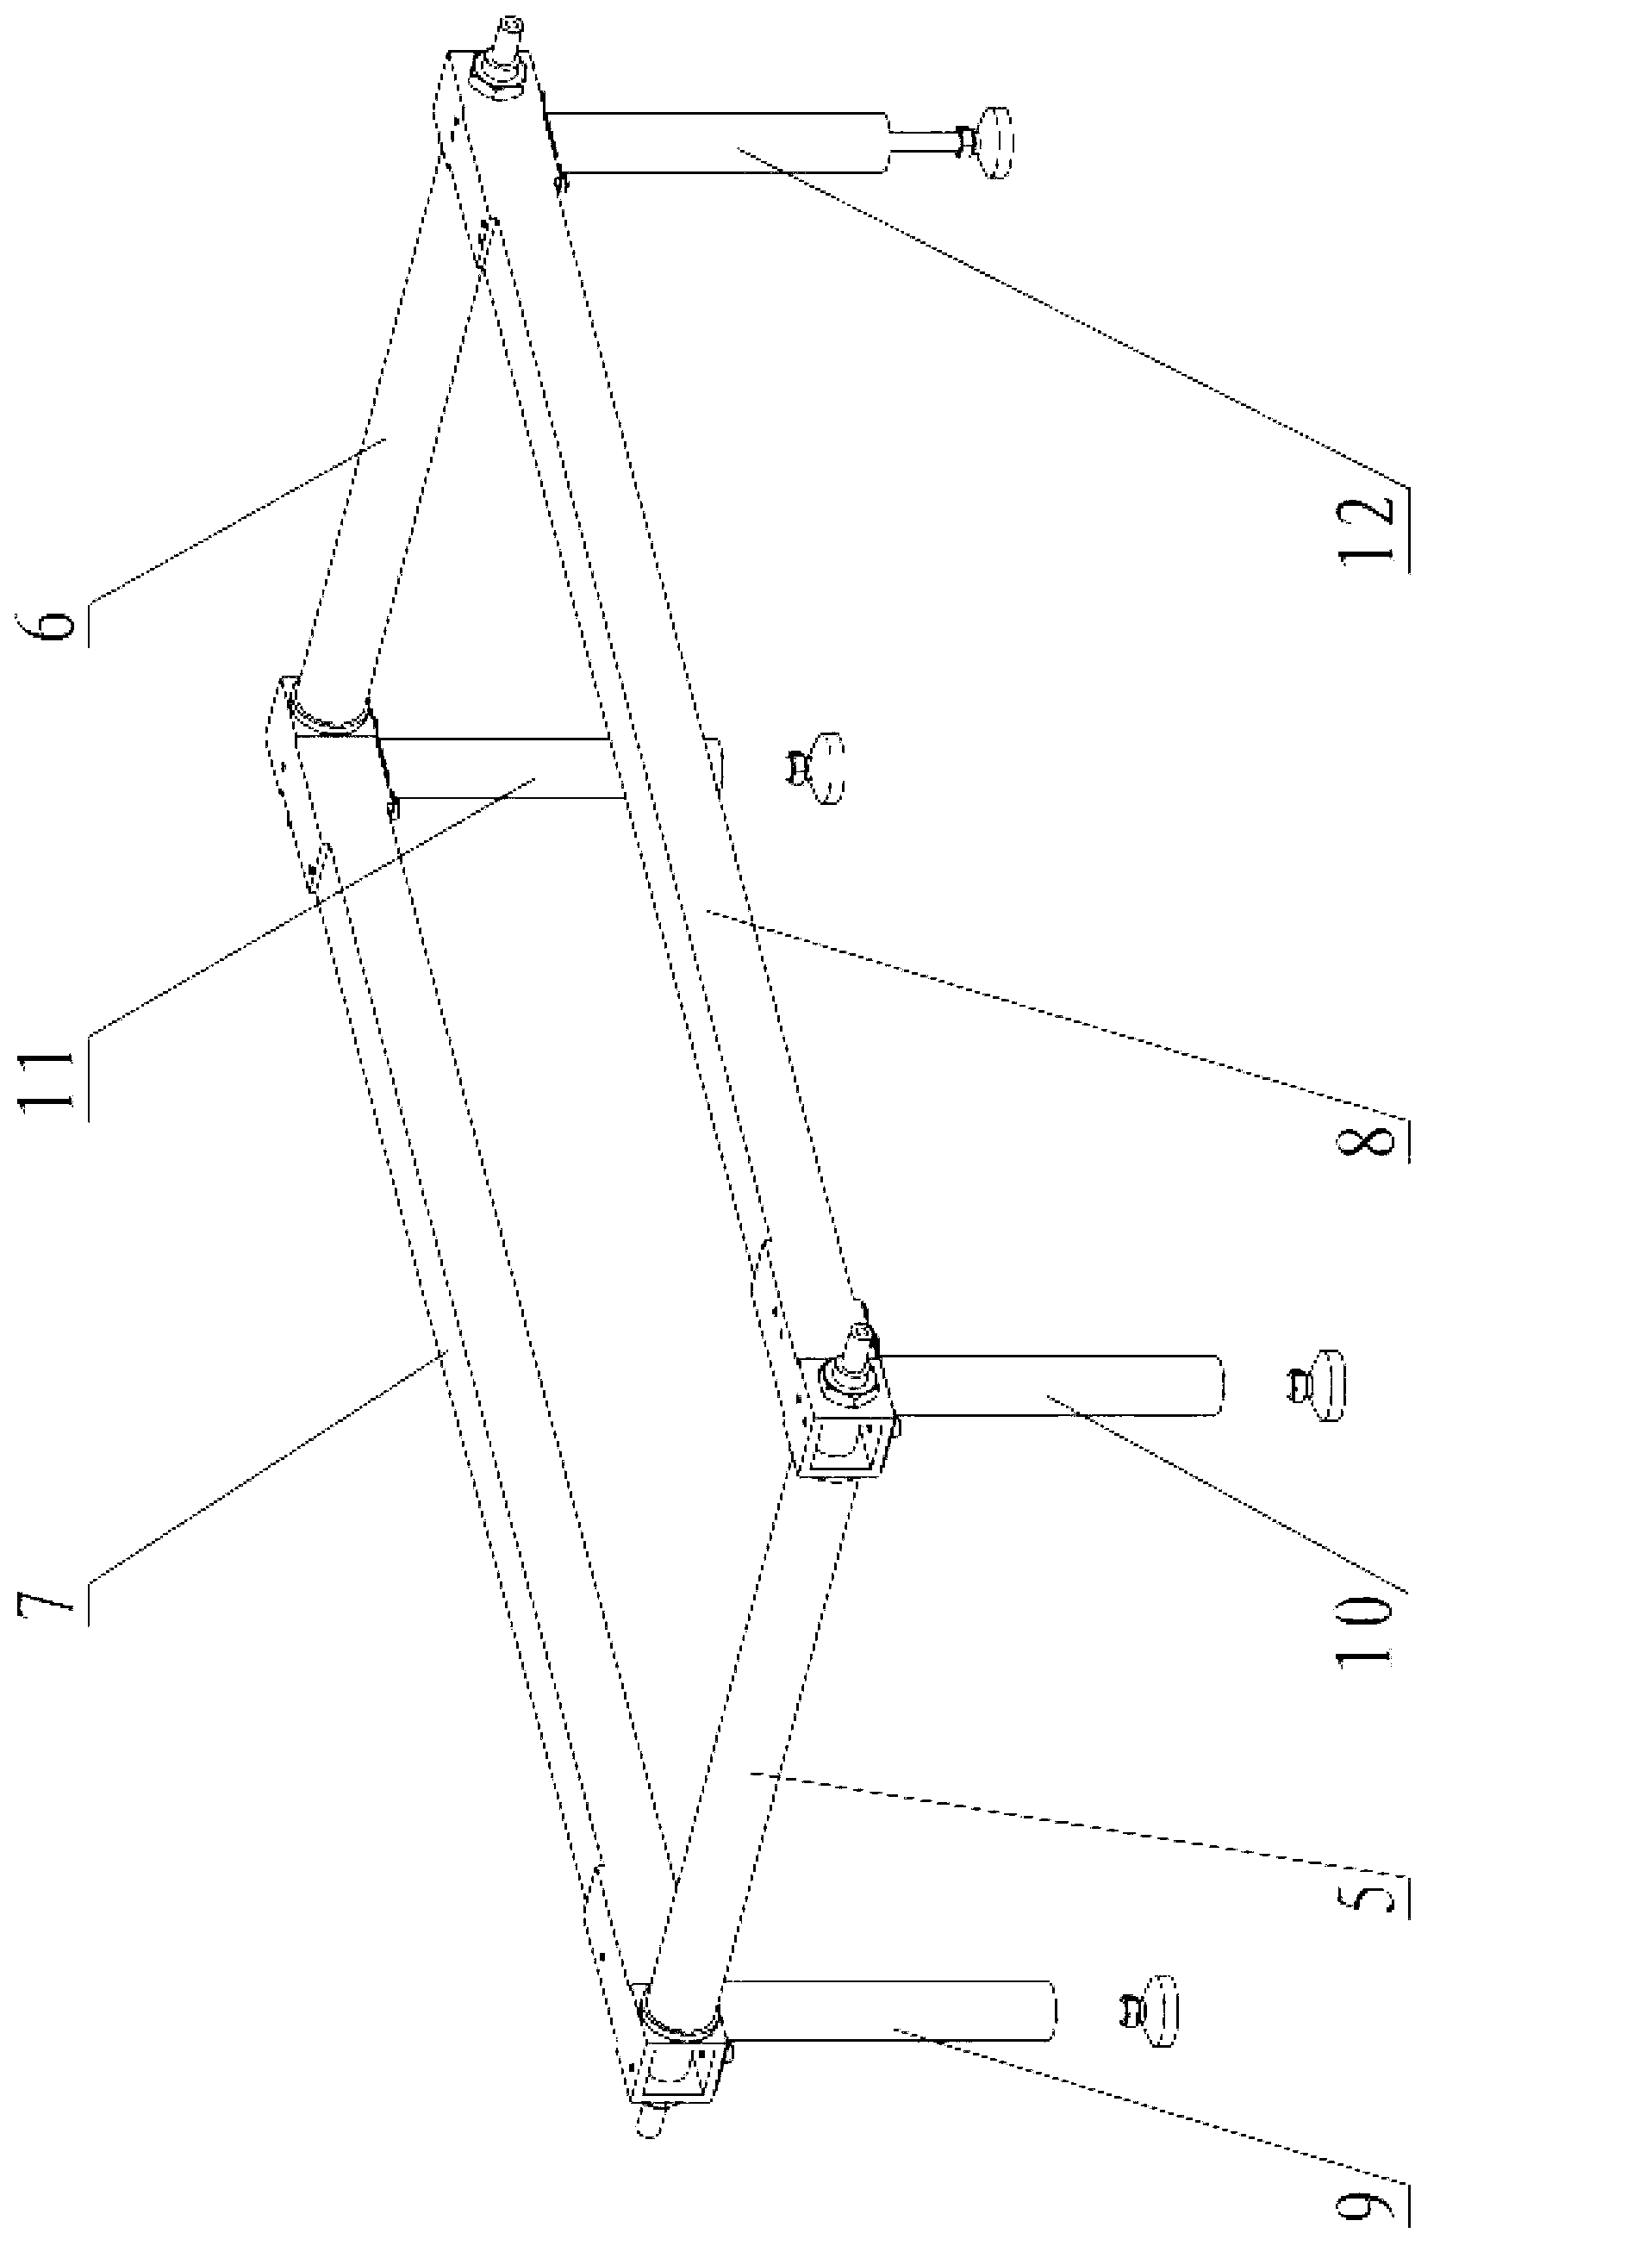 Split assembly and disassembly type device for measuring automobile four-wheel aligner